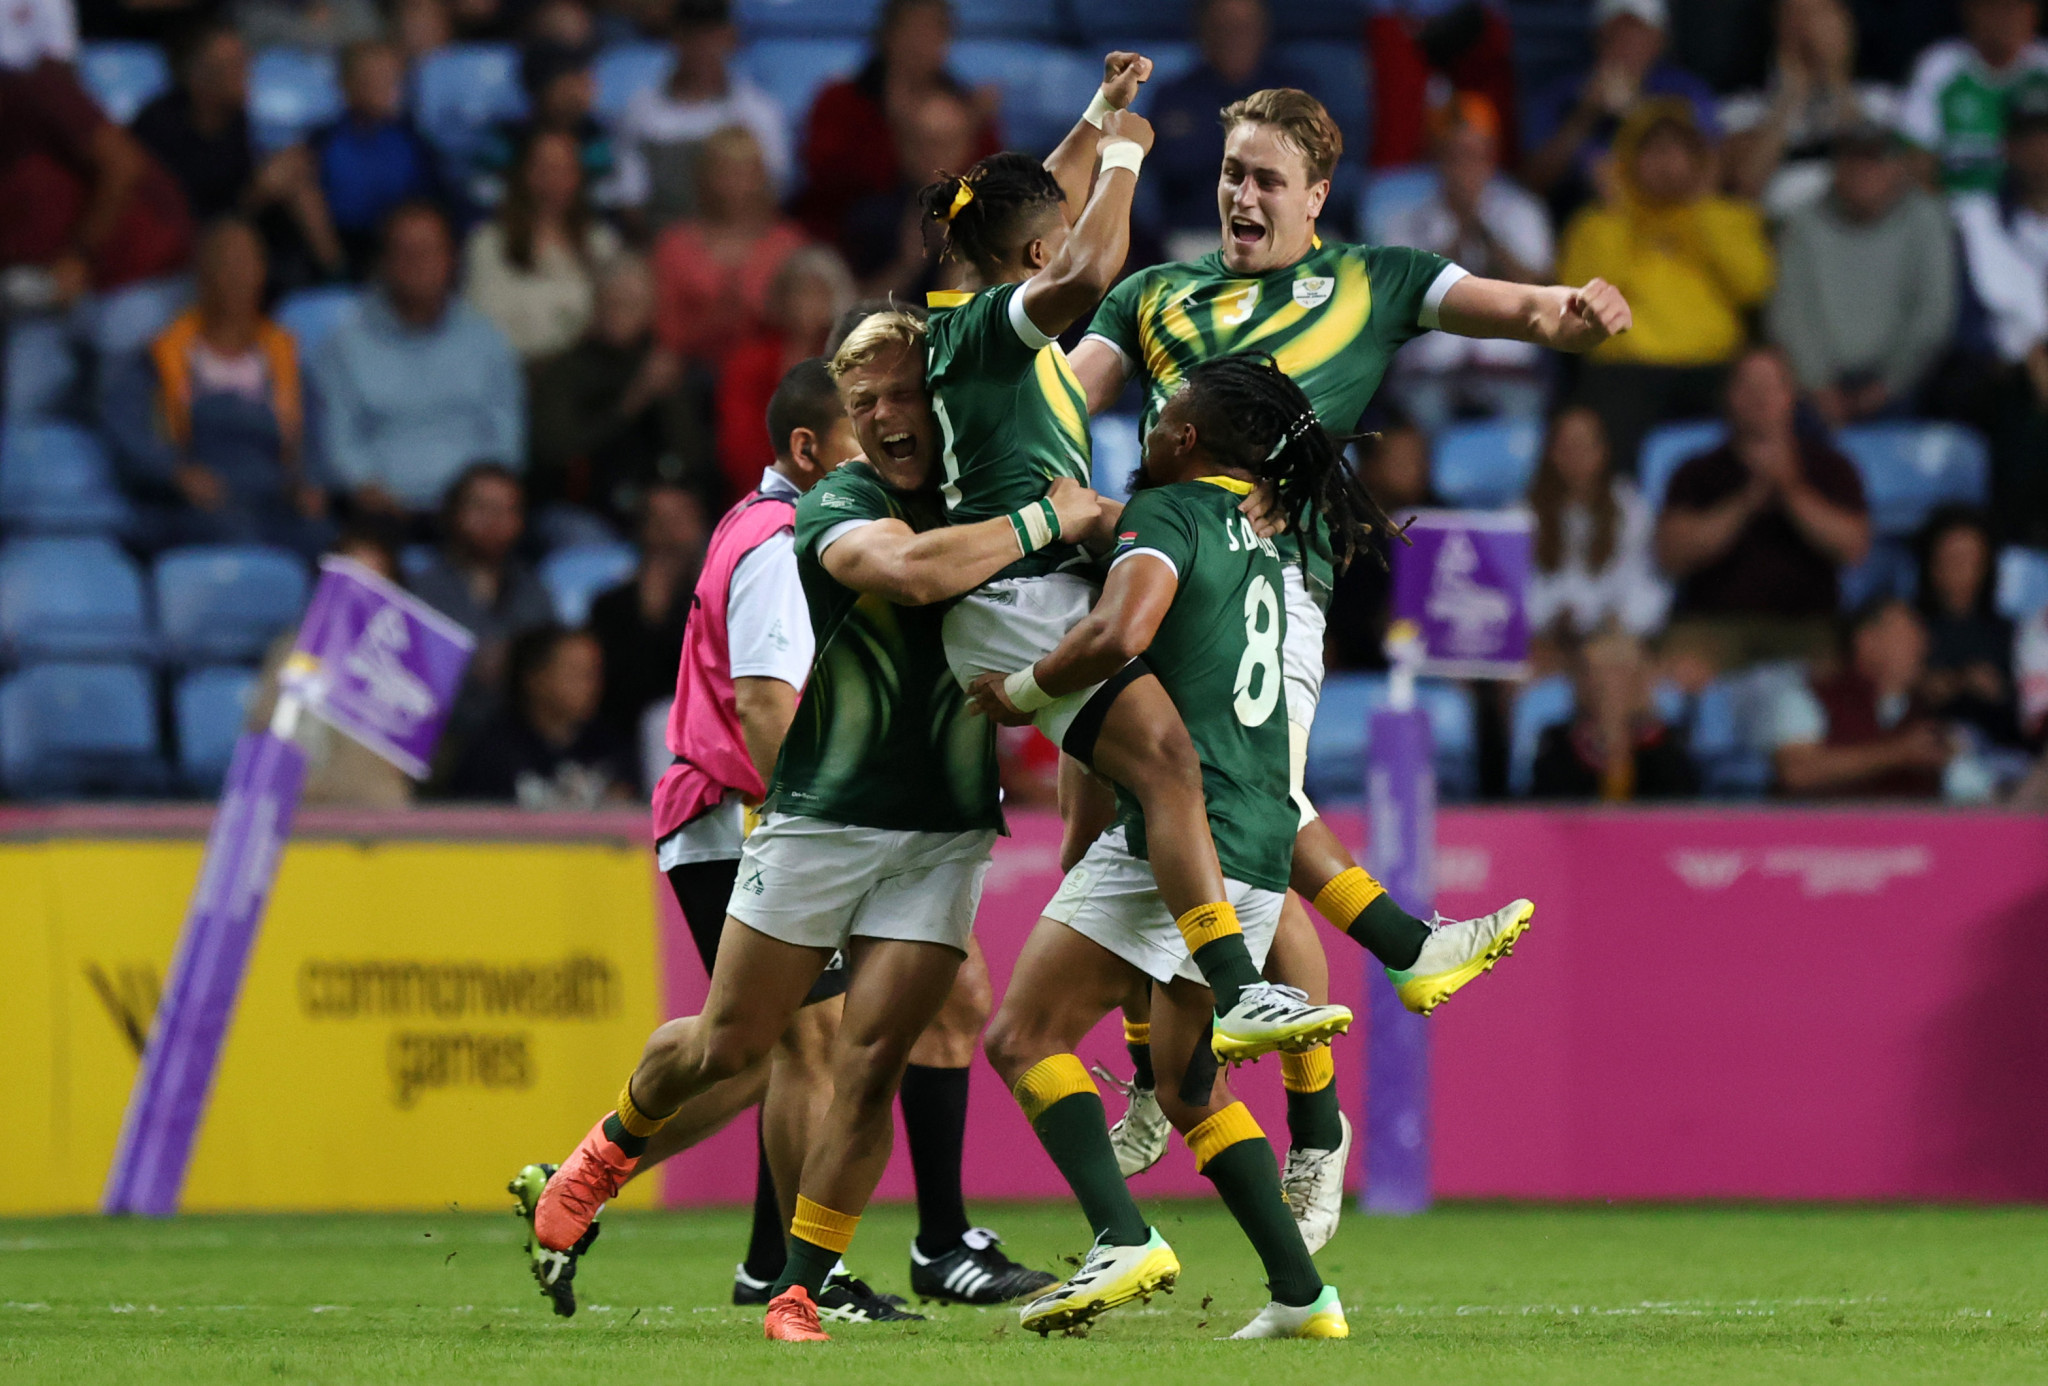 South Africa defeated Fiji in the final of the men's rugby sevens to claim gold ©Getty Images